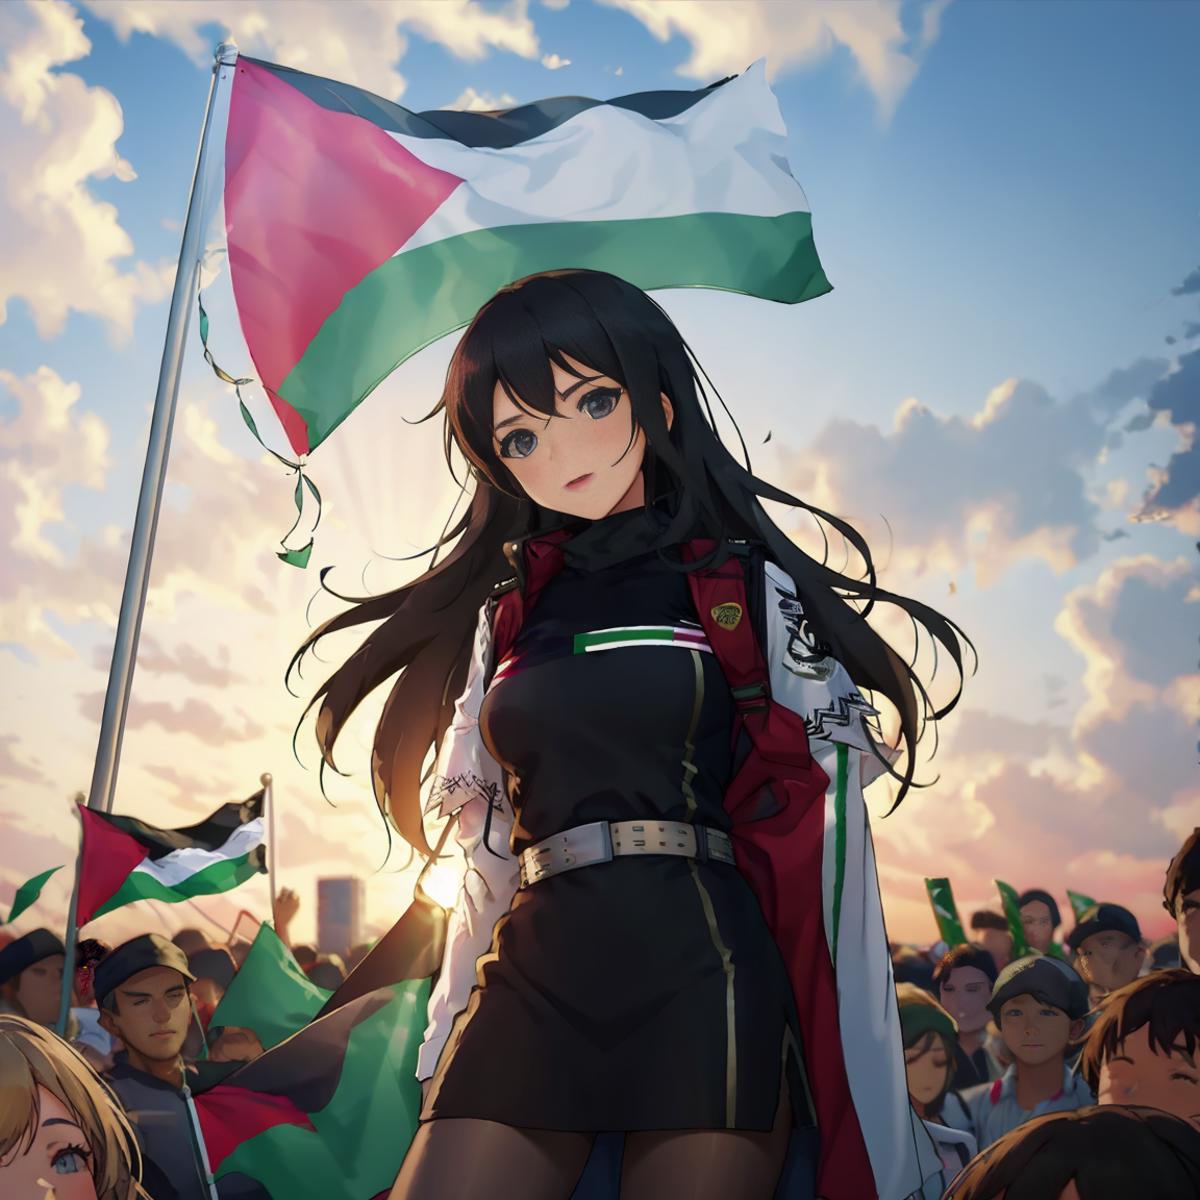 A young woman with a red and black dress stands proudly in front of a crowd holding a green, white, and red flag.